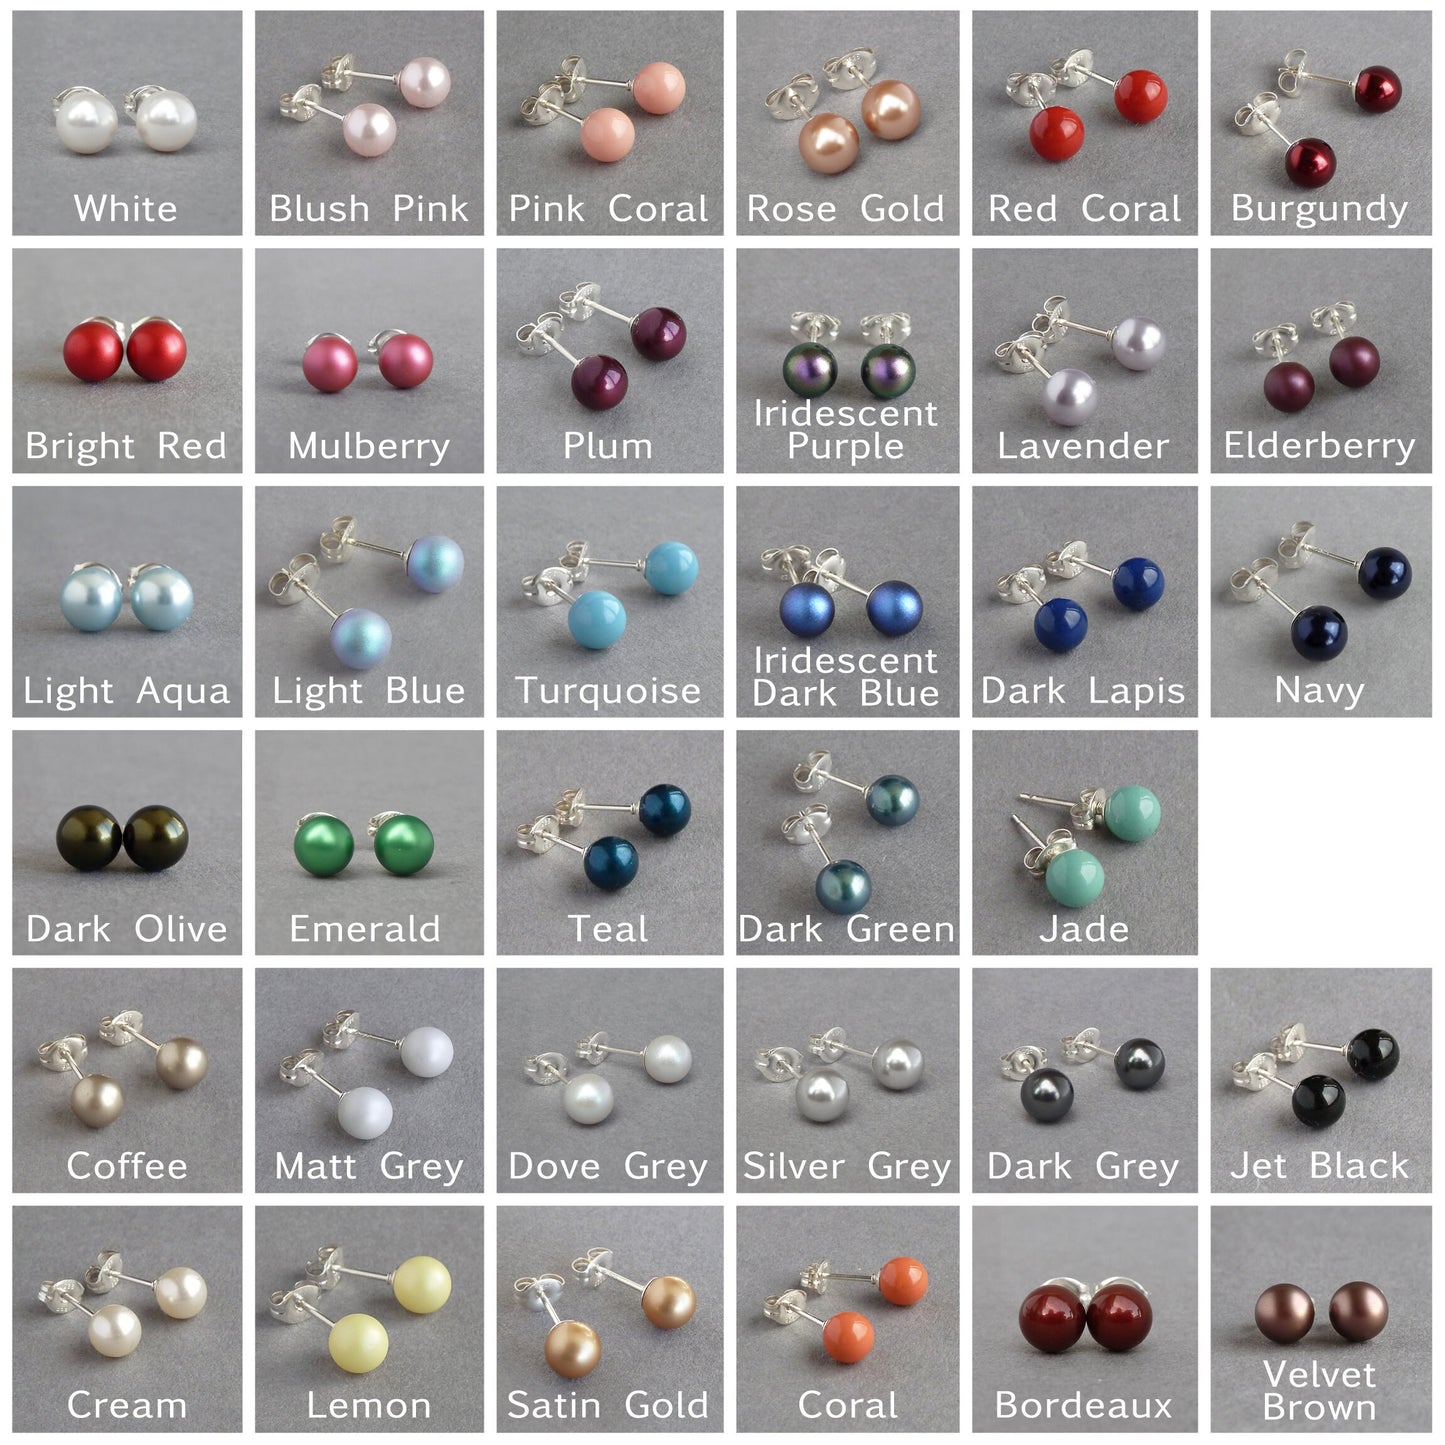 6mm Silver Grey Glass Pearl Studs - Small, Round, Light Grey Stud Earrings